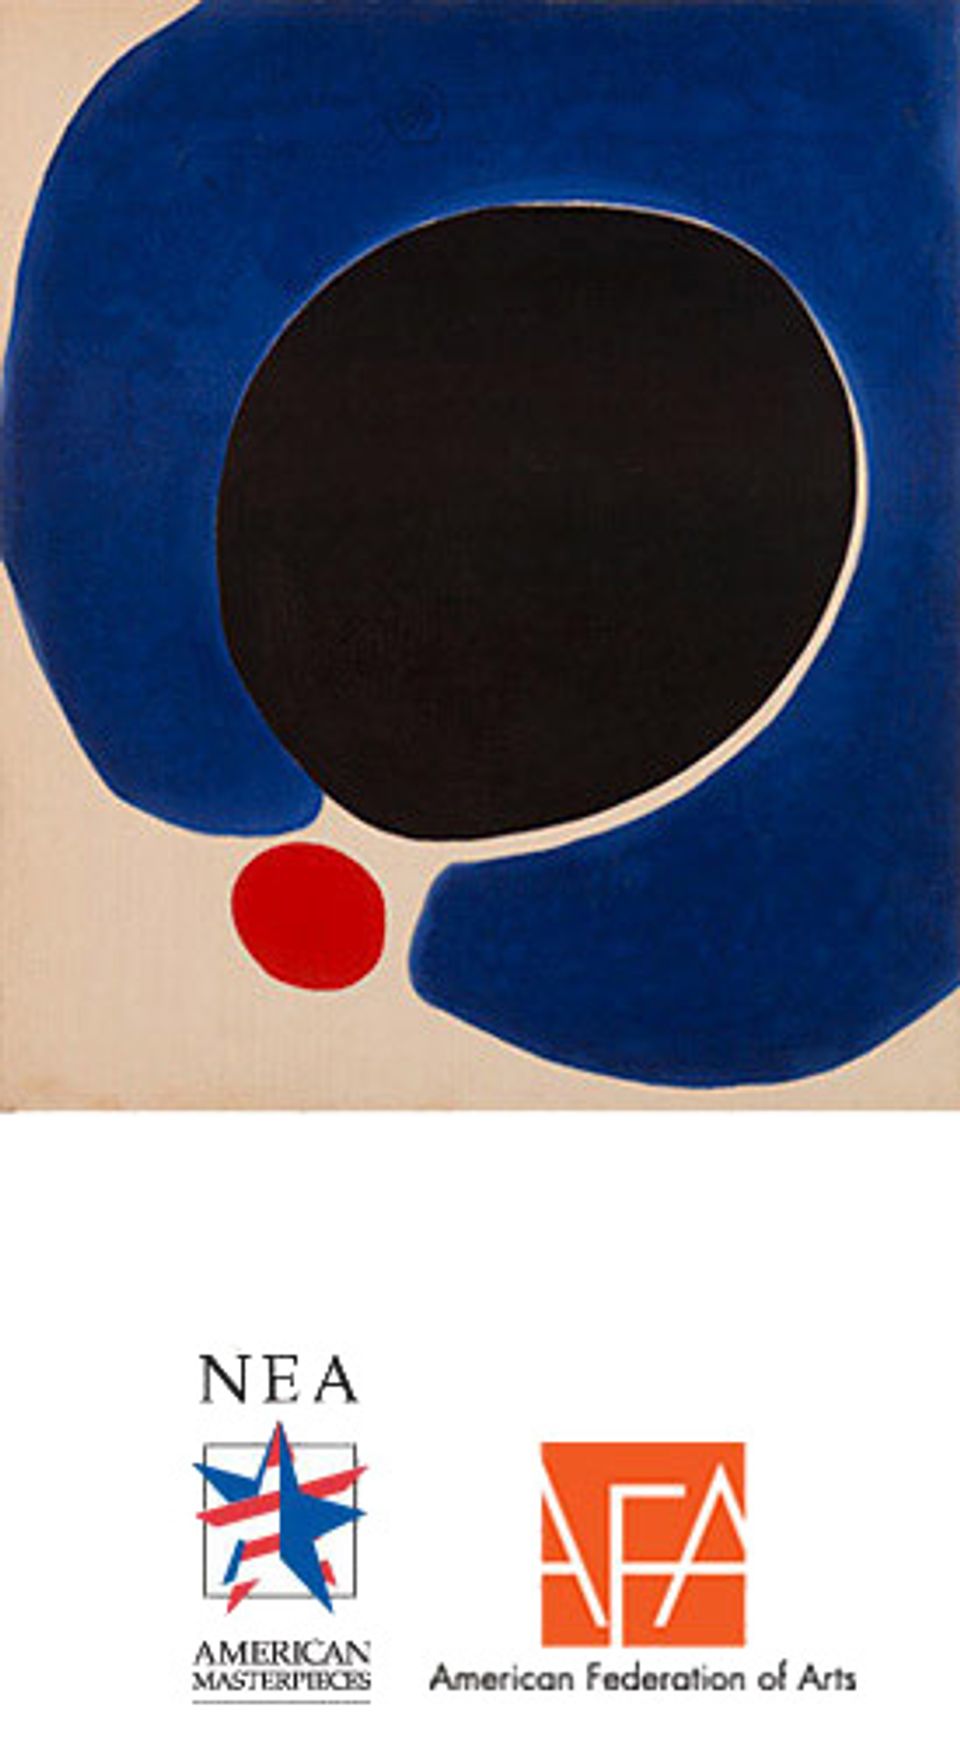 This is a painting of a large black circle and a smaller red circle surrounded by a blue mass. 